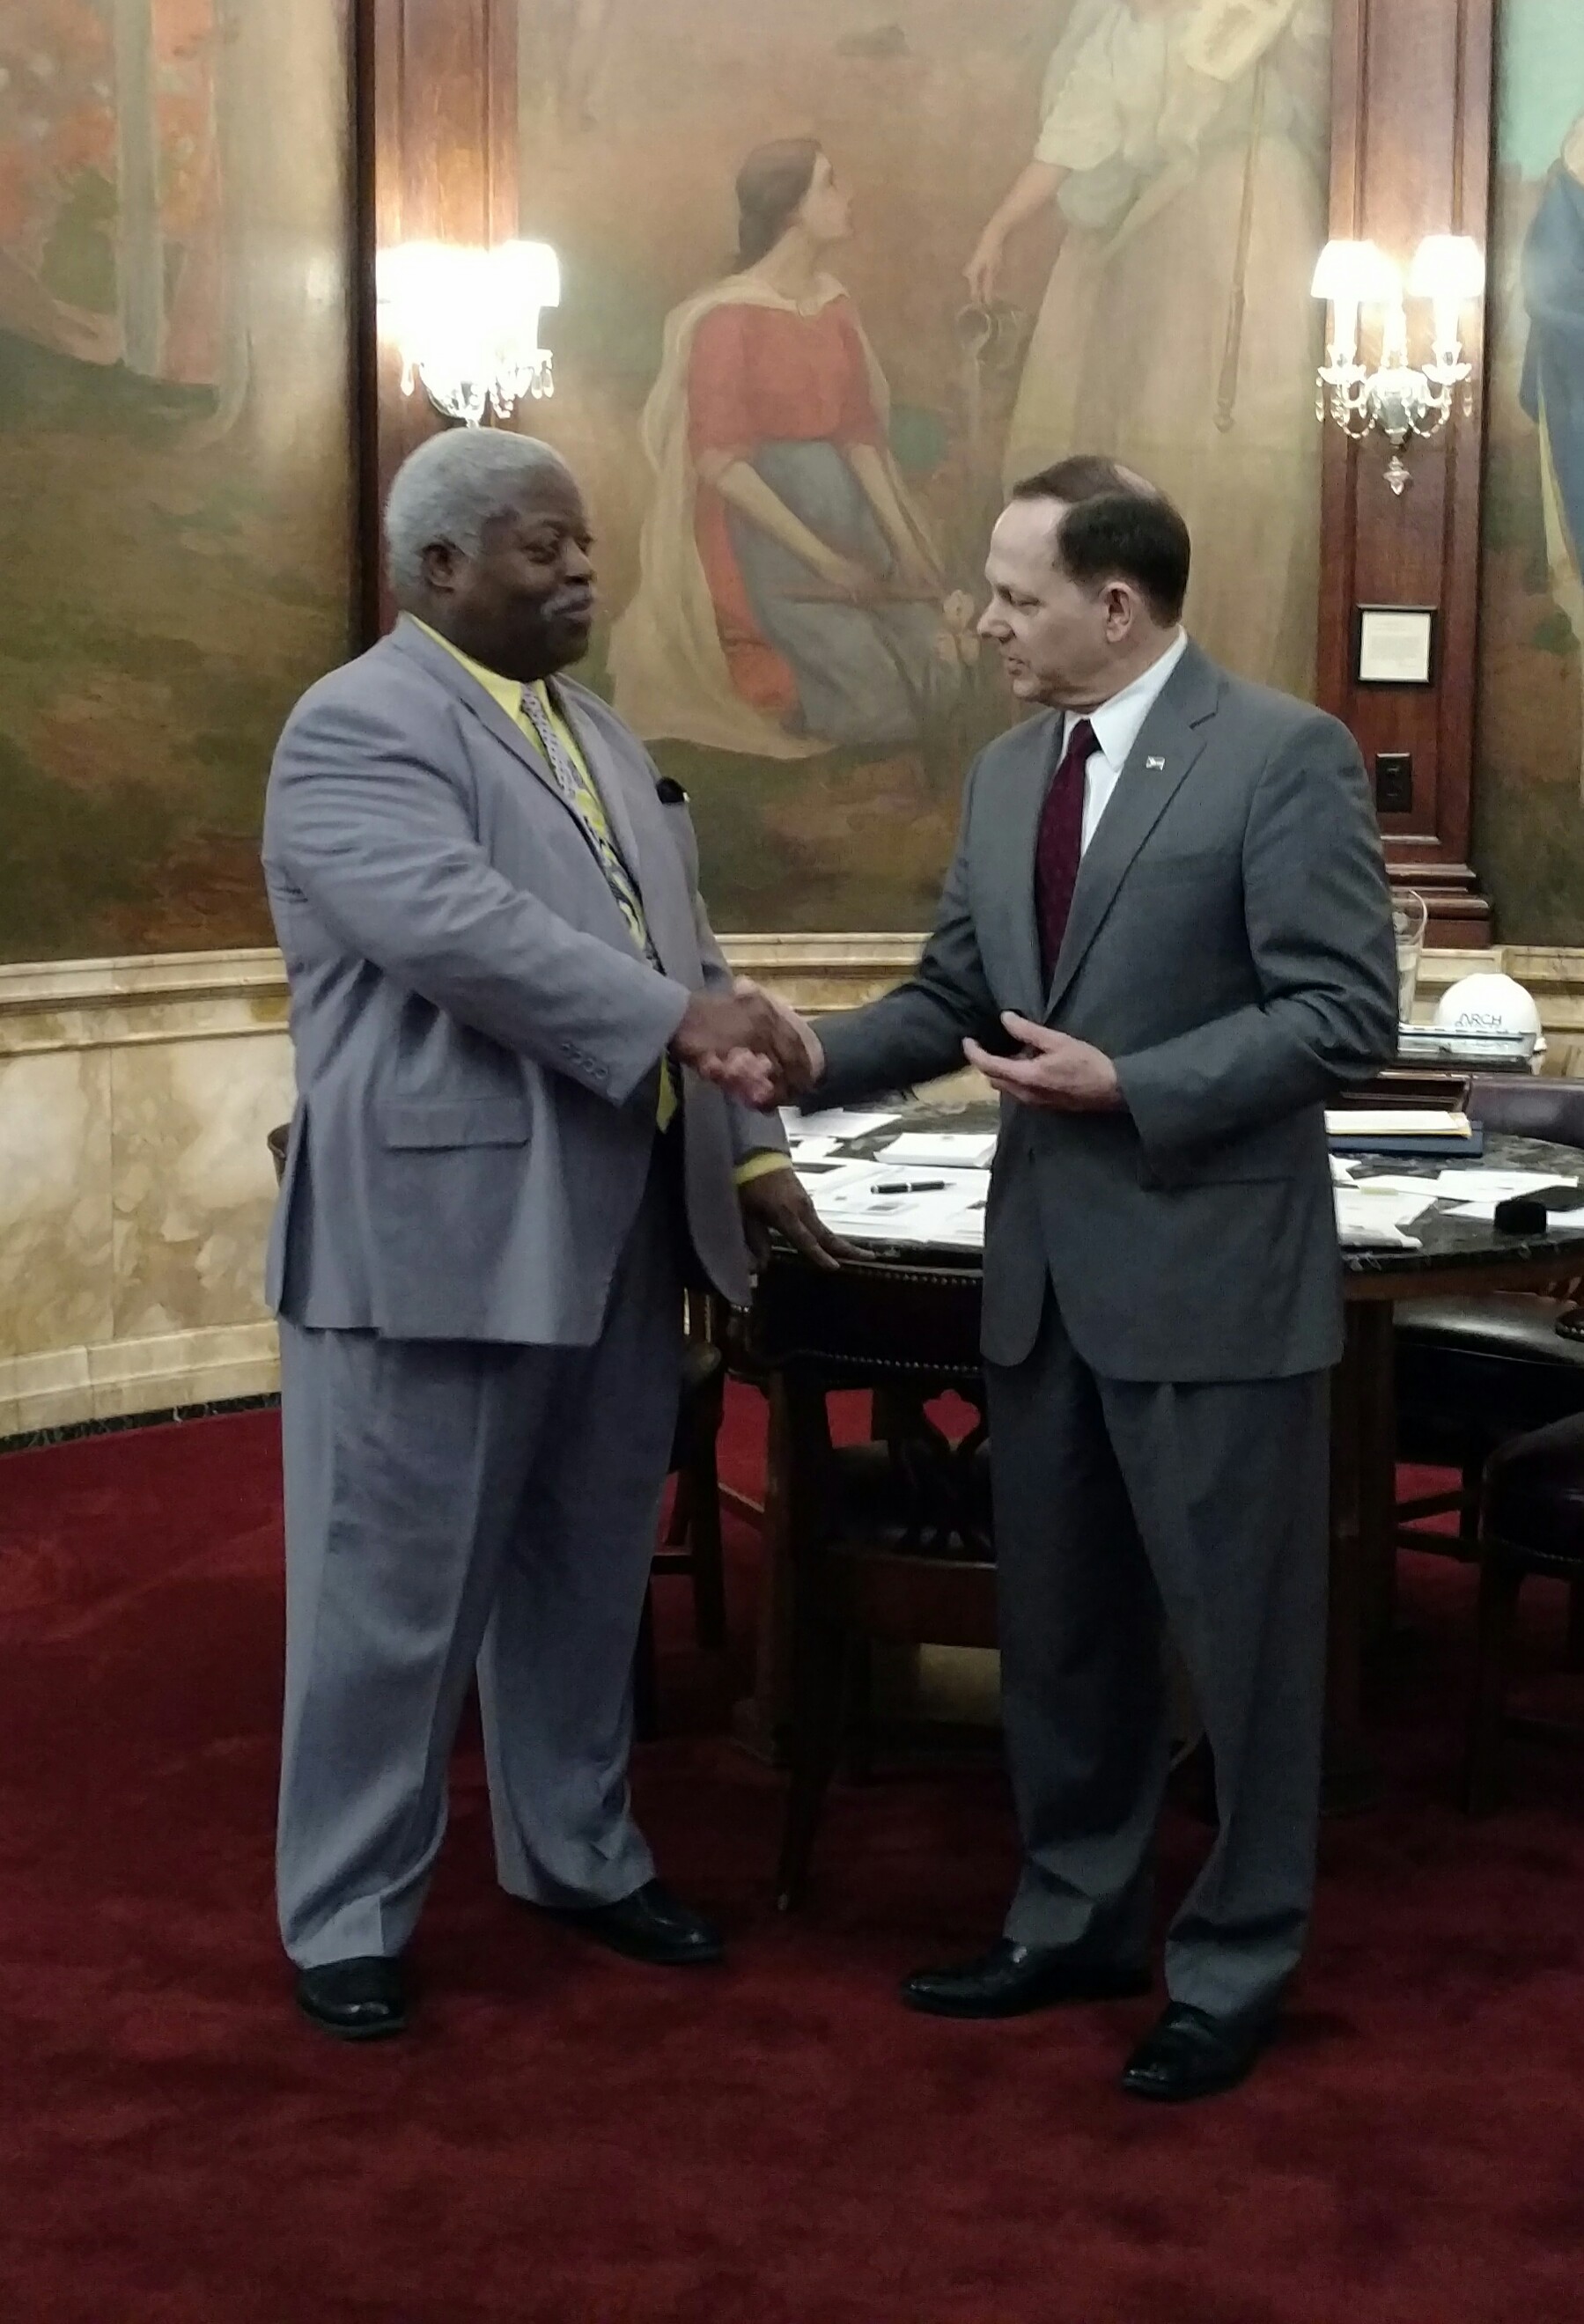 Mayor Francis Slay congratulates Robert Cotton on his 40 years of service with the City.